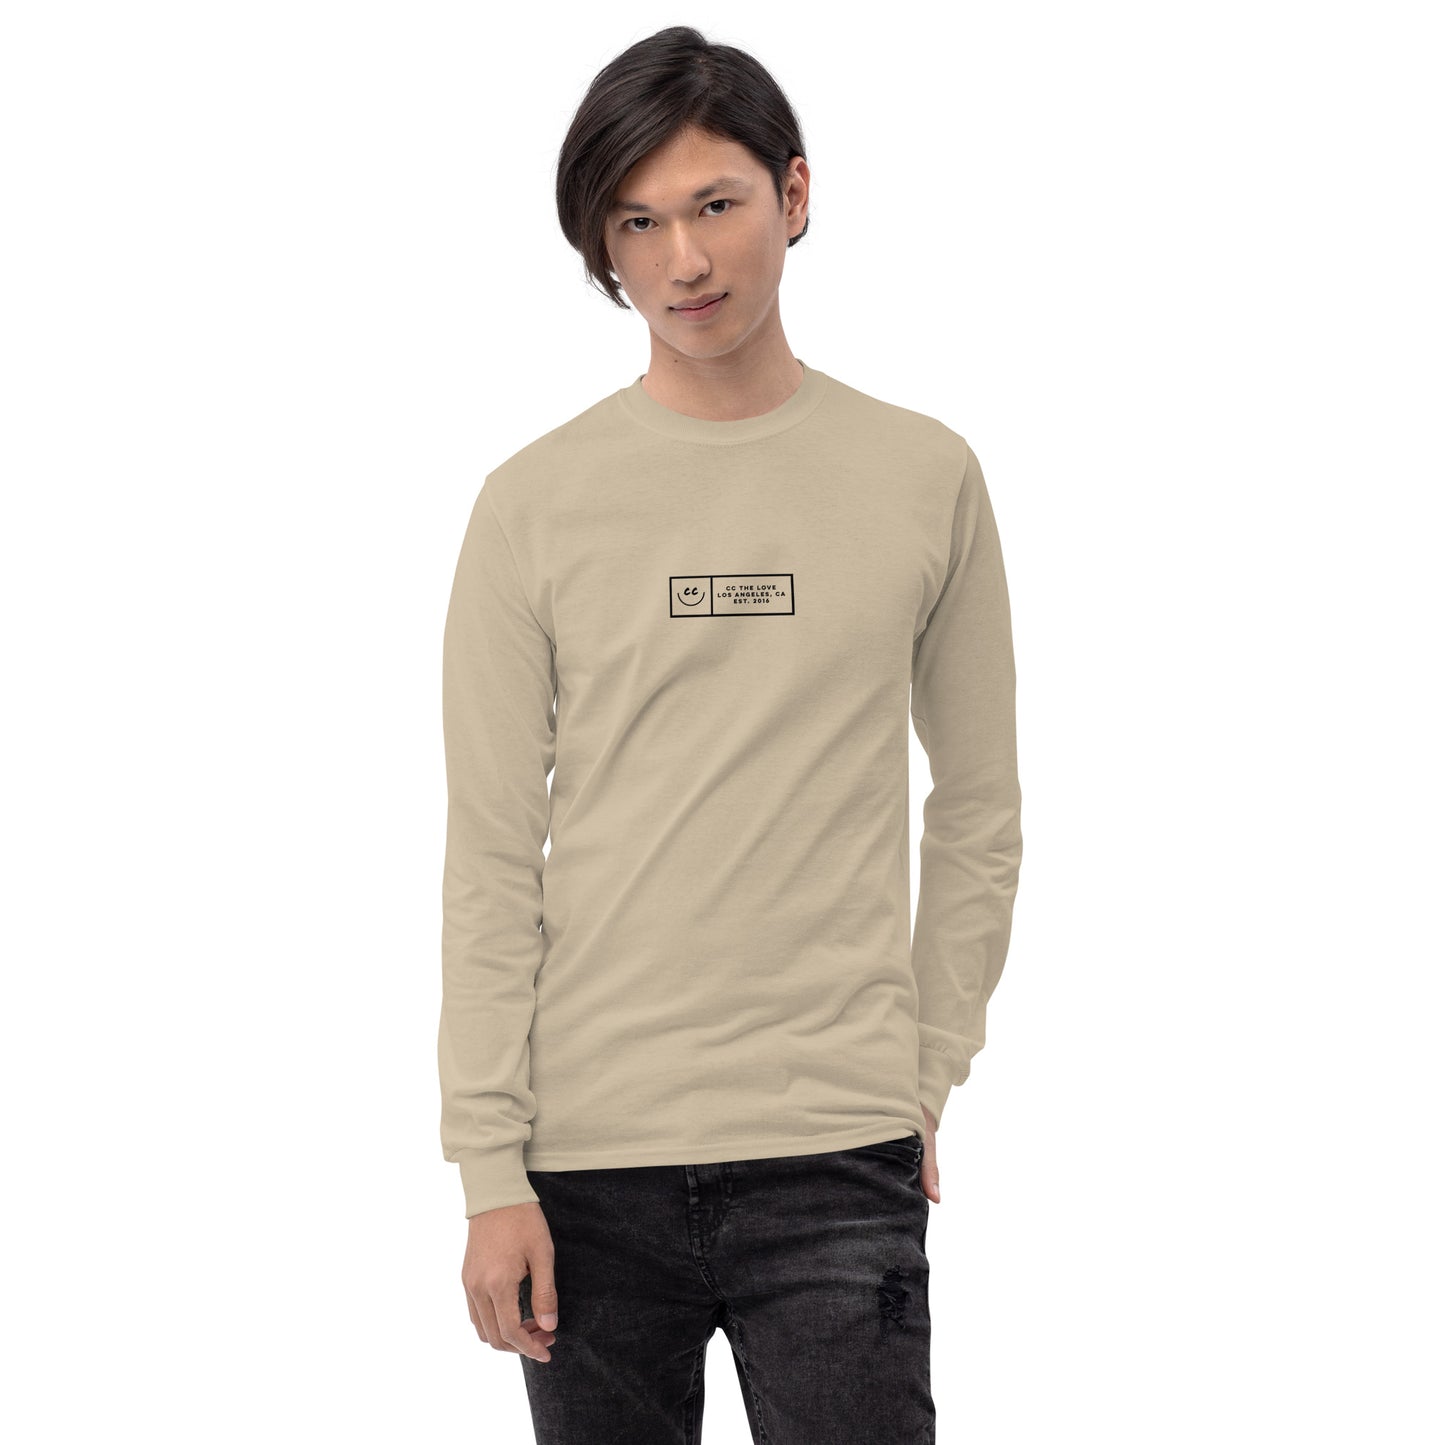 Boxed Smile Tee in Sand - Long Sleeve